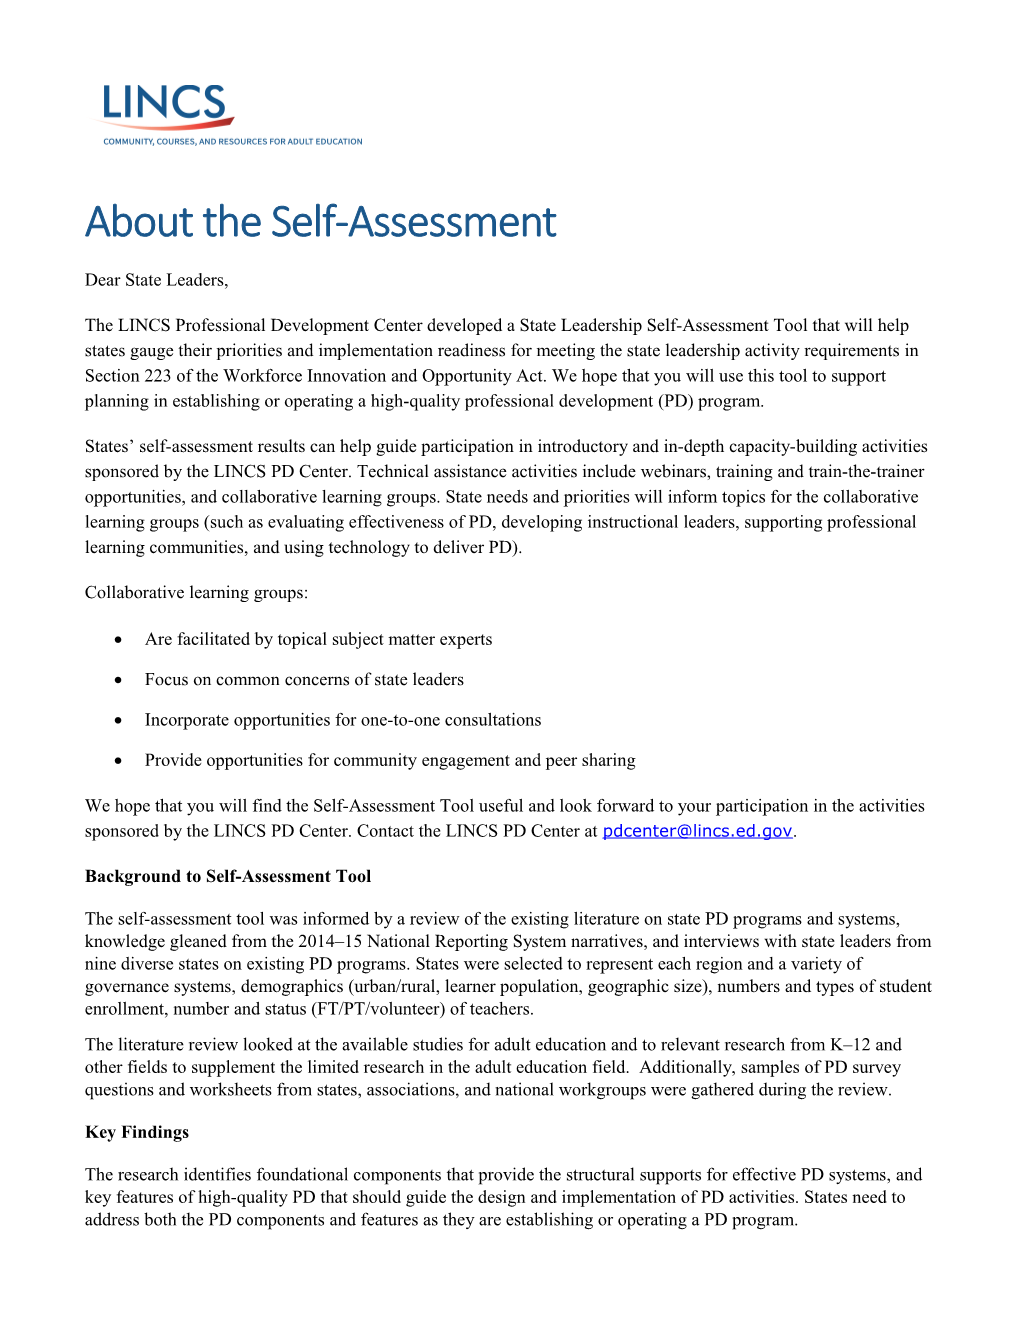 About the Self-Assessment